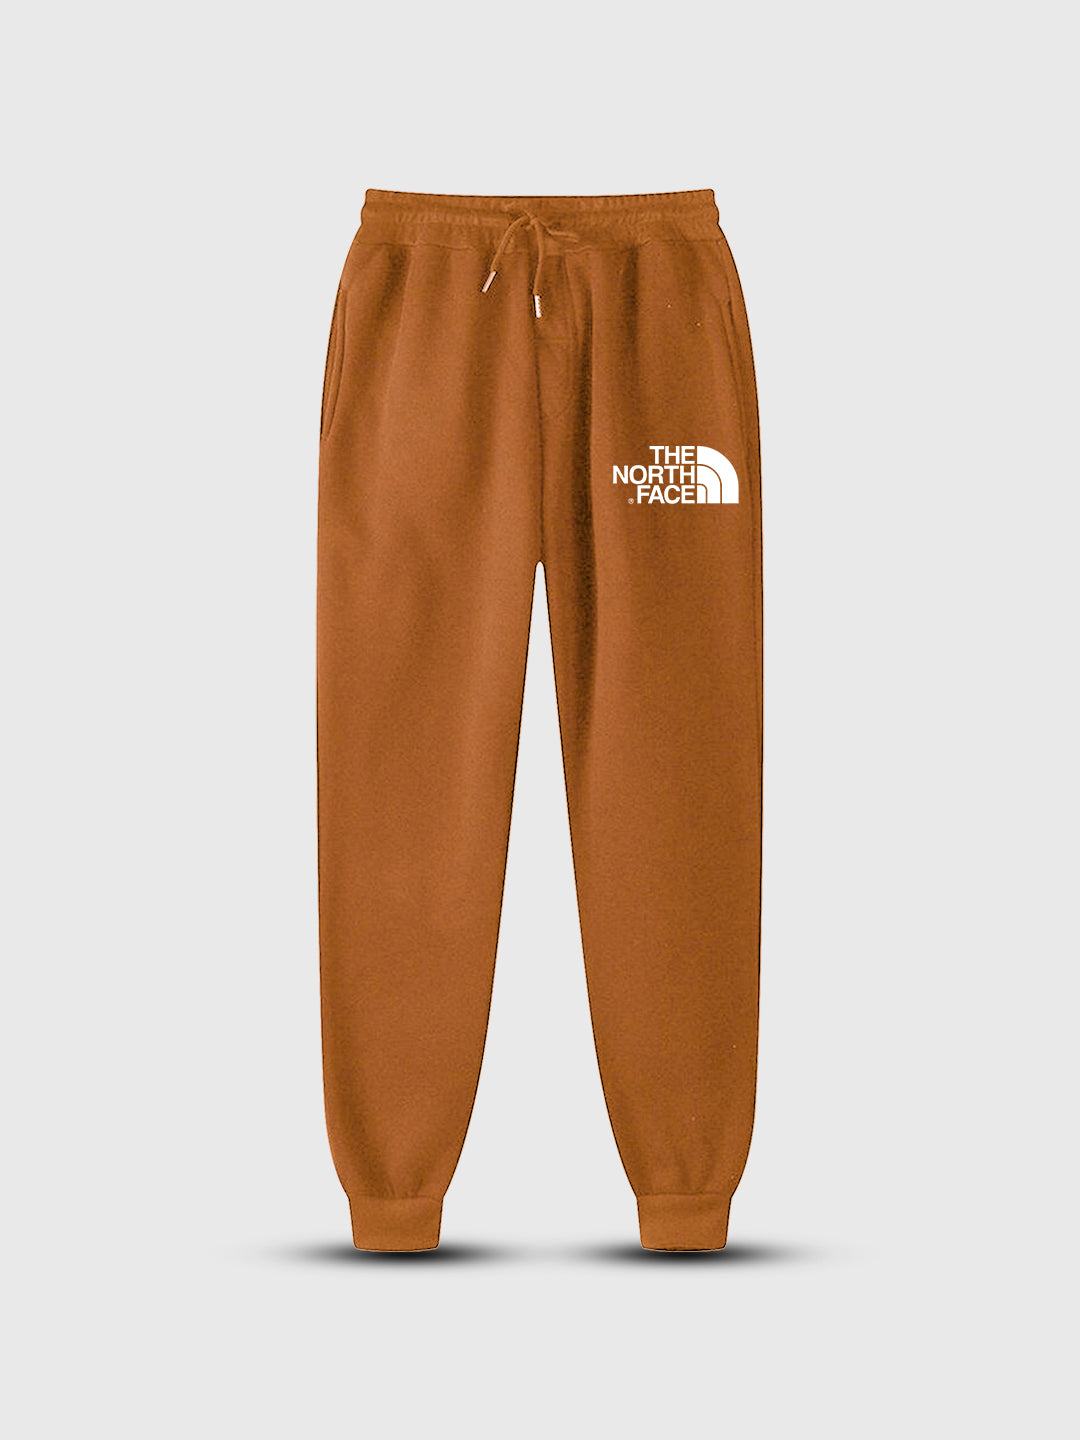 North Face Printed Heavy Fleece Trouser / Jogger Pant